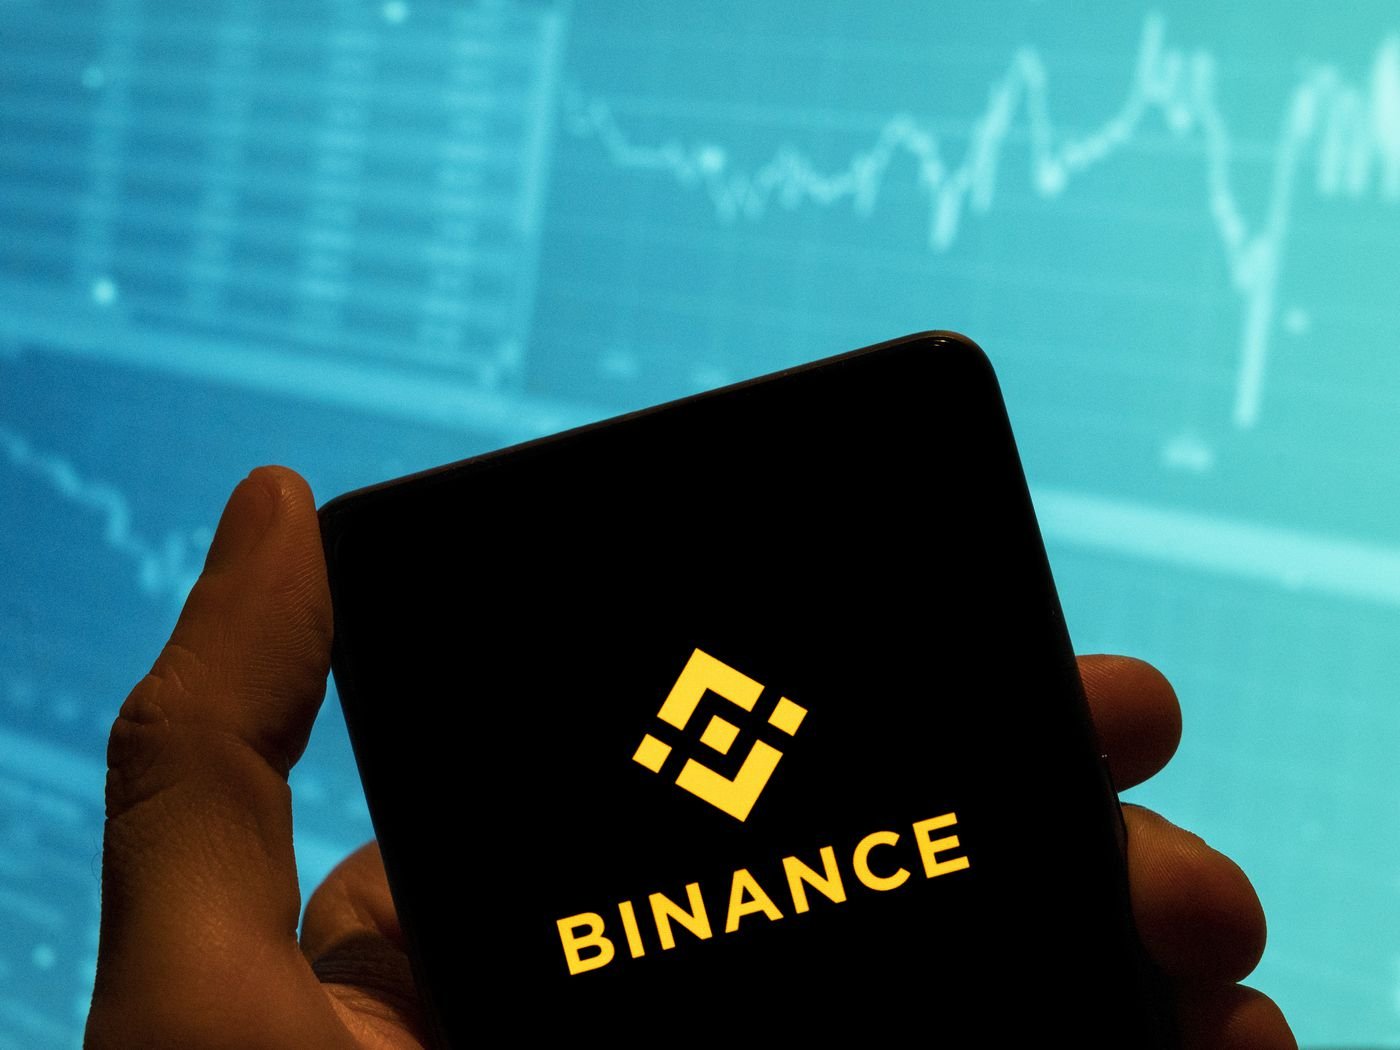 Binance Academy Teams Up With Coursera To Provide Crypto And Blockchain Education Worldwide